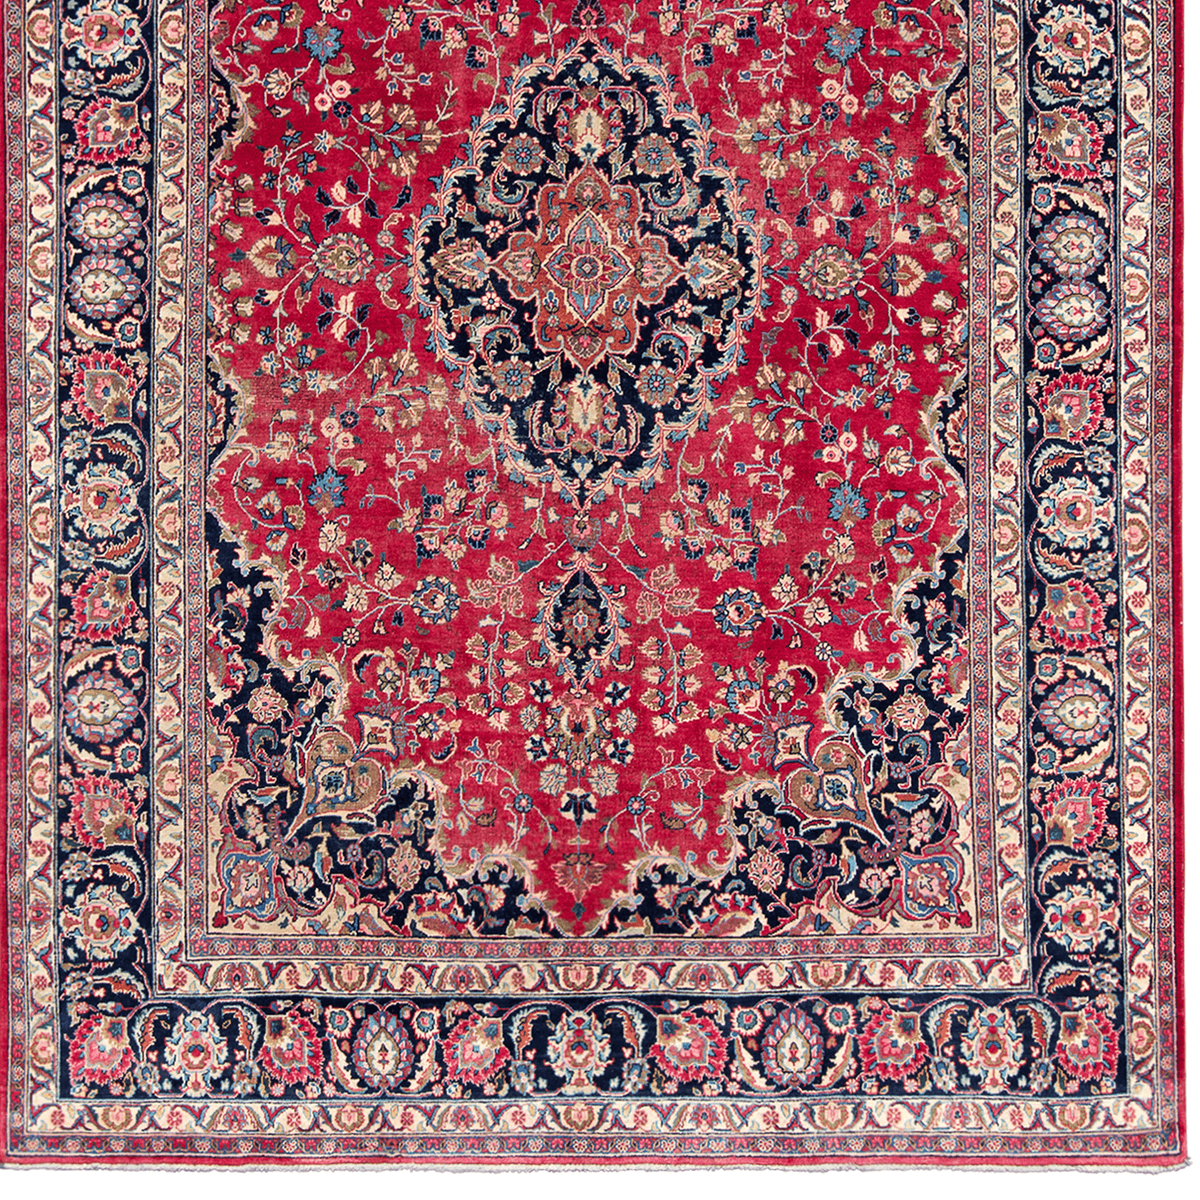 Fine Hand-knotted Wool Vintage Kashan Persian Rug 249cm x 358cm